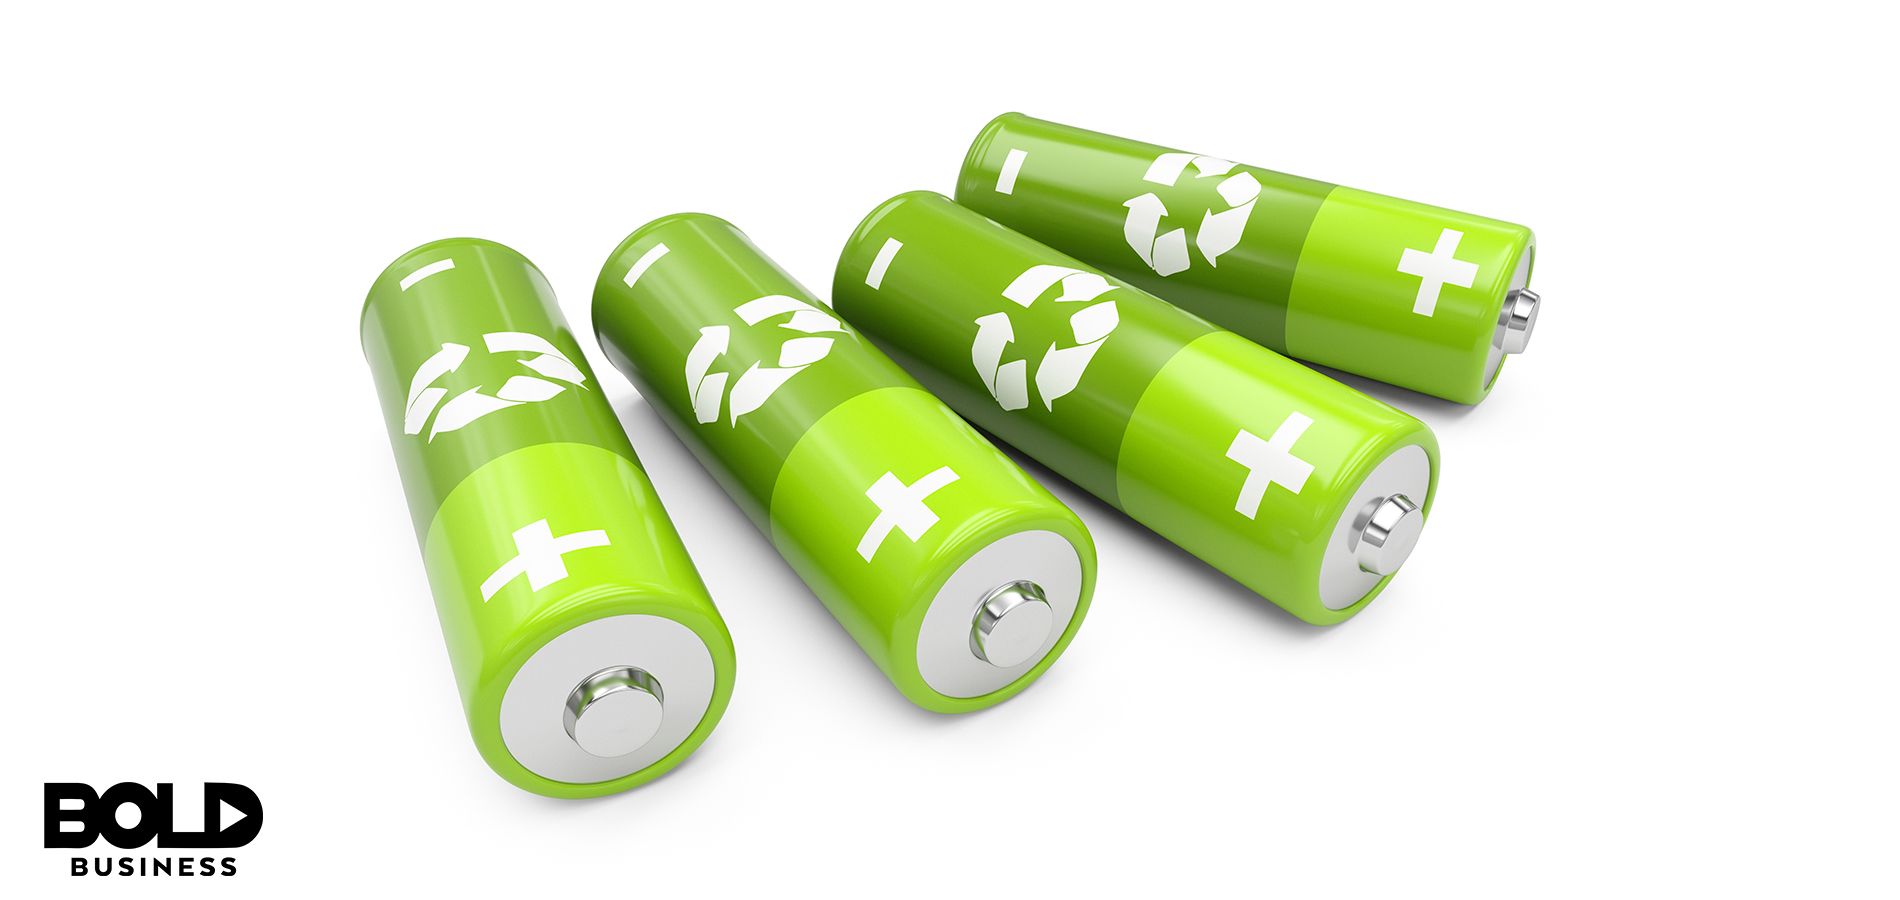 a photo of four green batteries